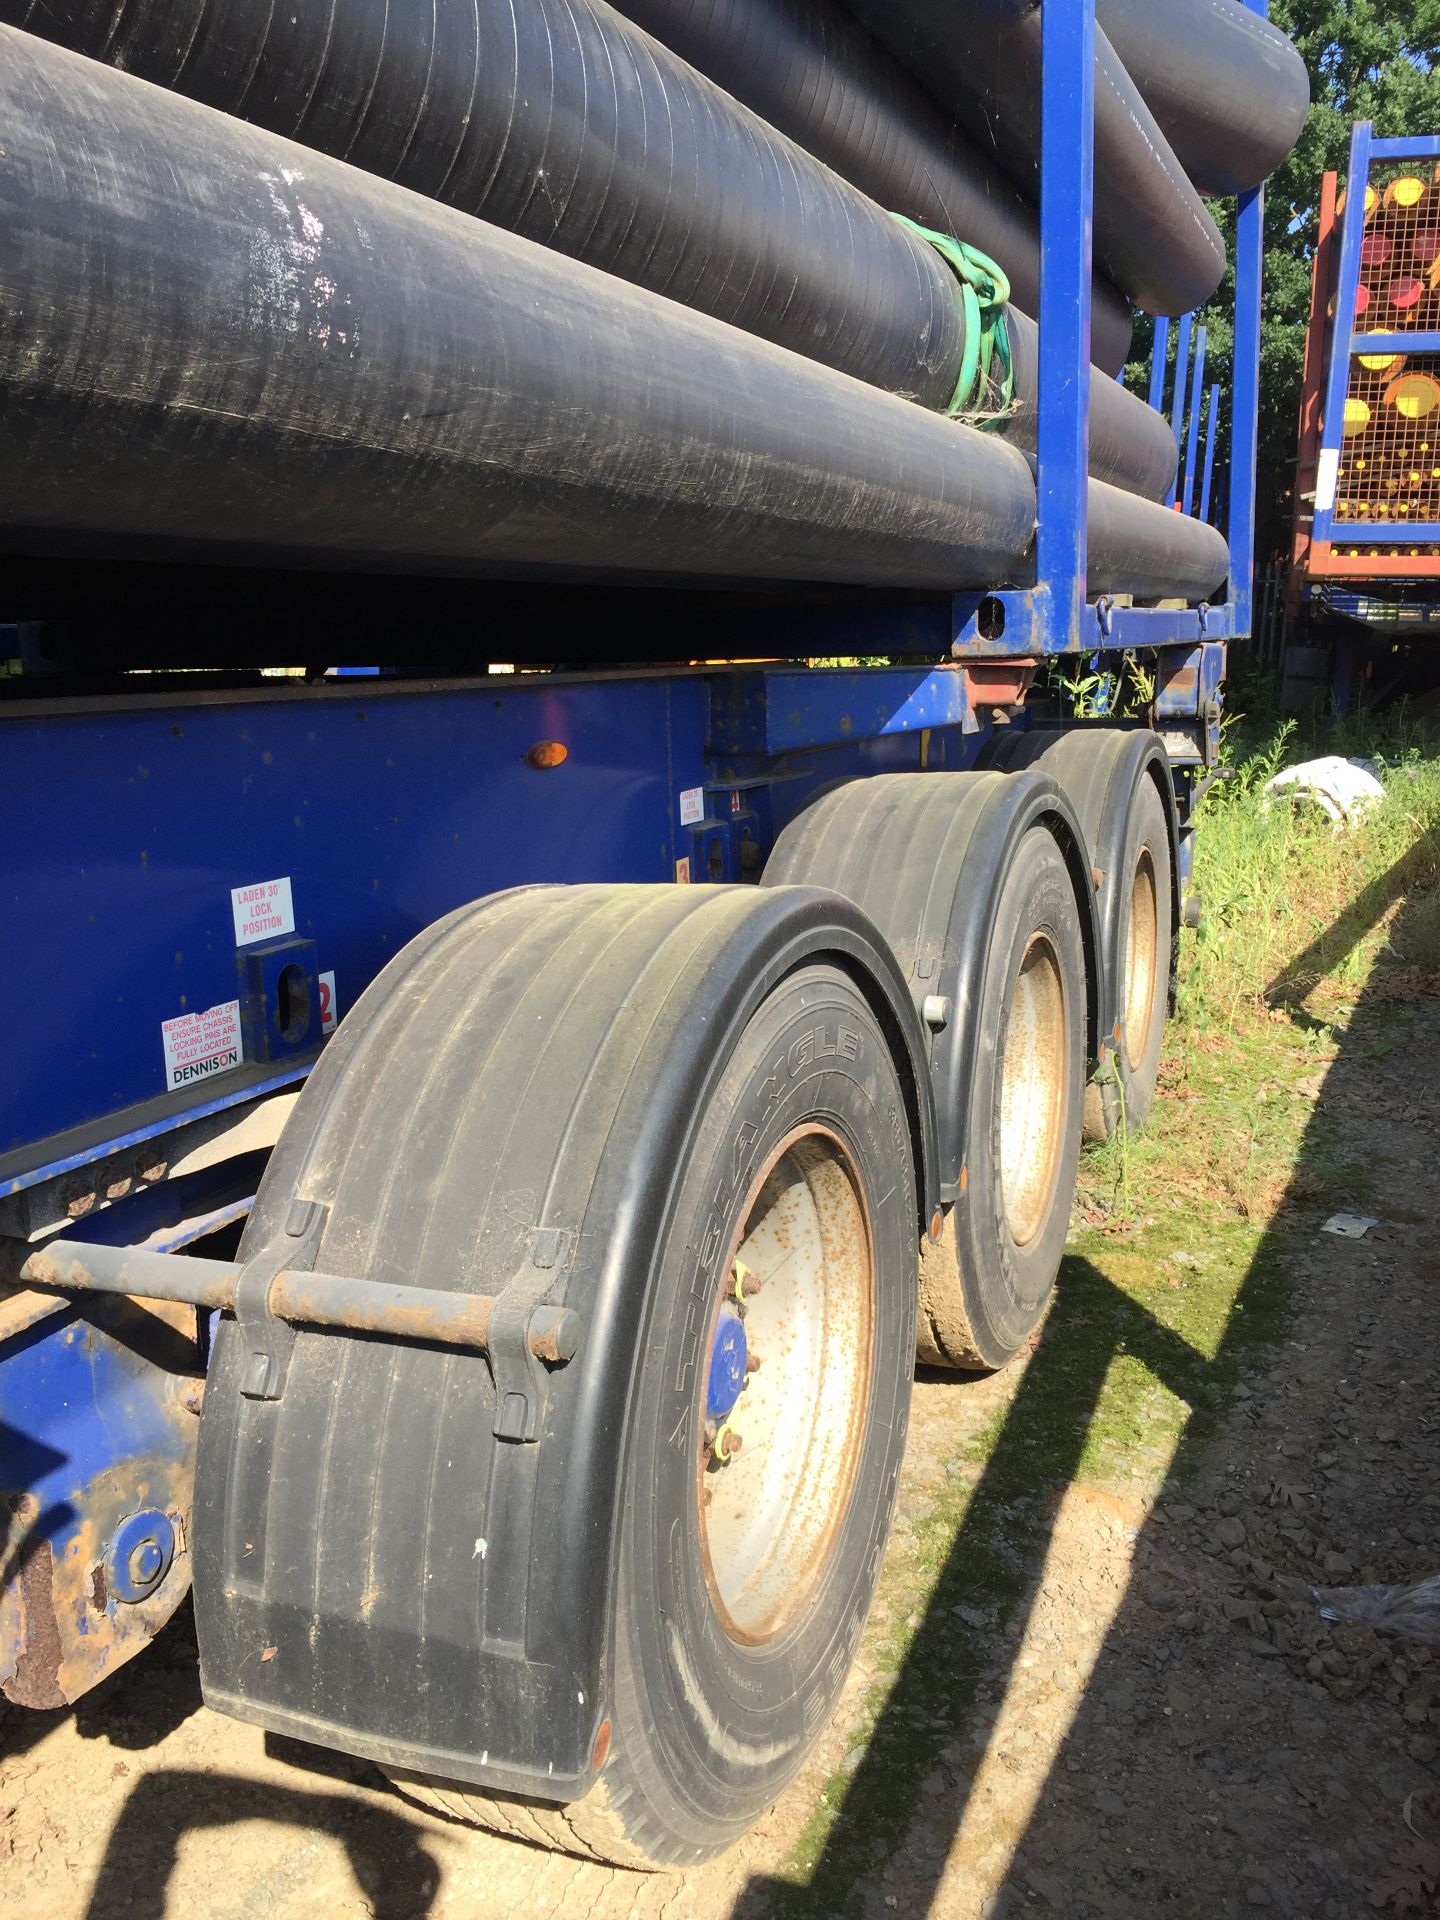 40Ft Dennison Artic Lorry Trailer - Year Of Manufacture 2008, Test Certificate Expired Early 2018 - Image 11 of 12